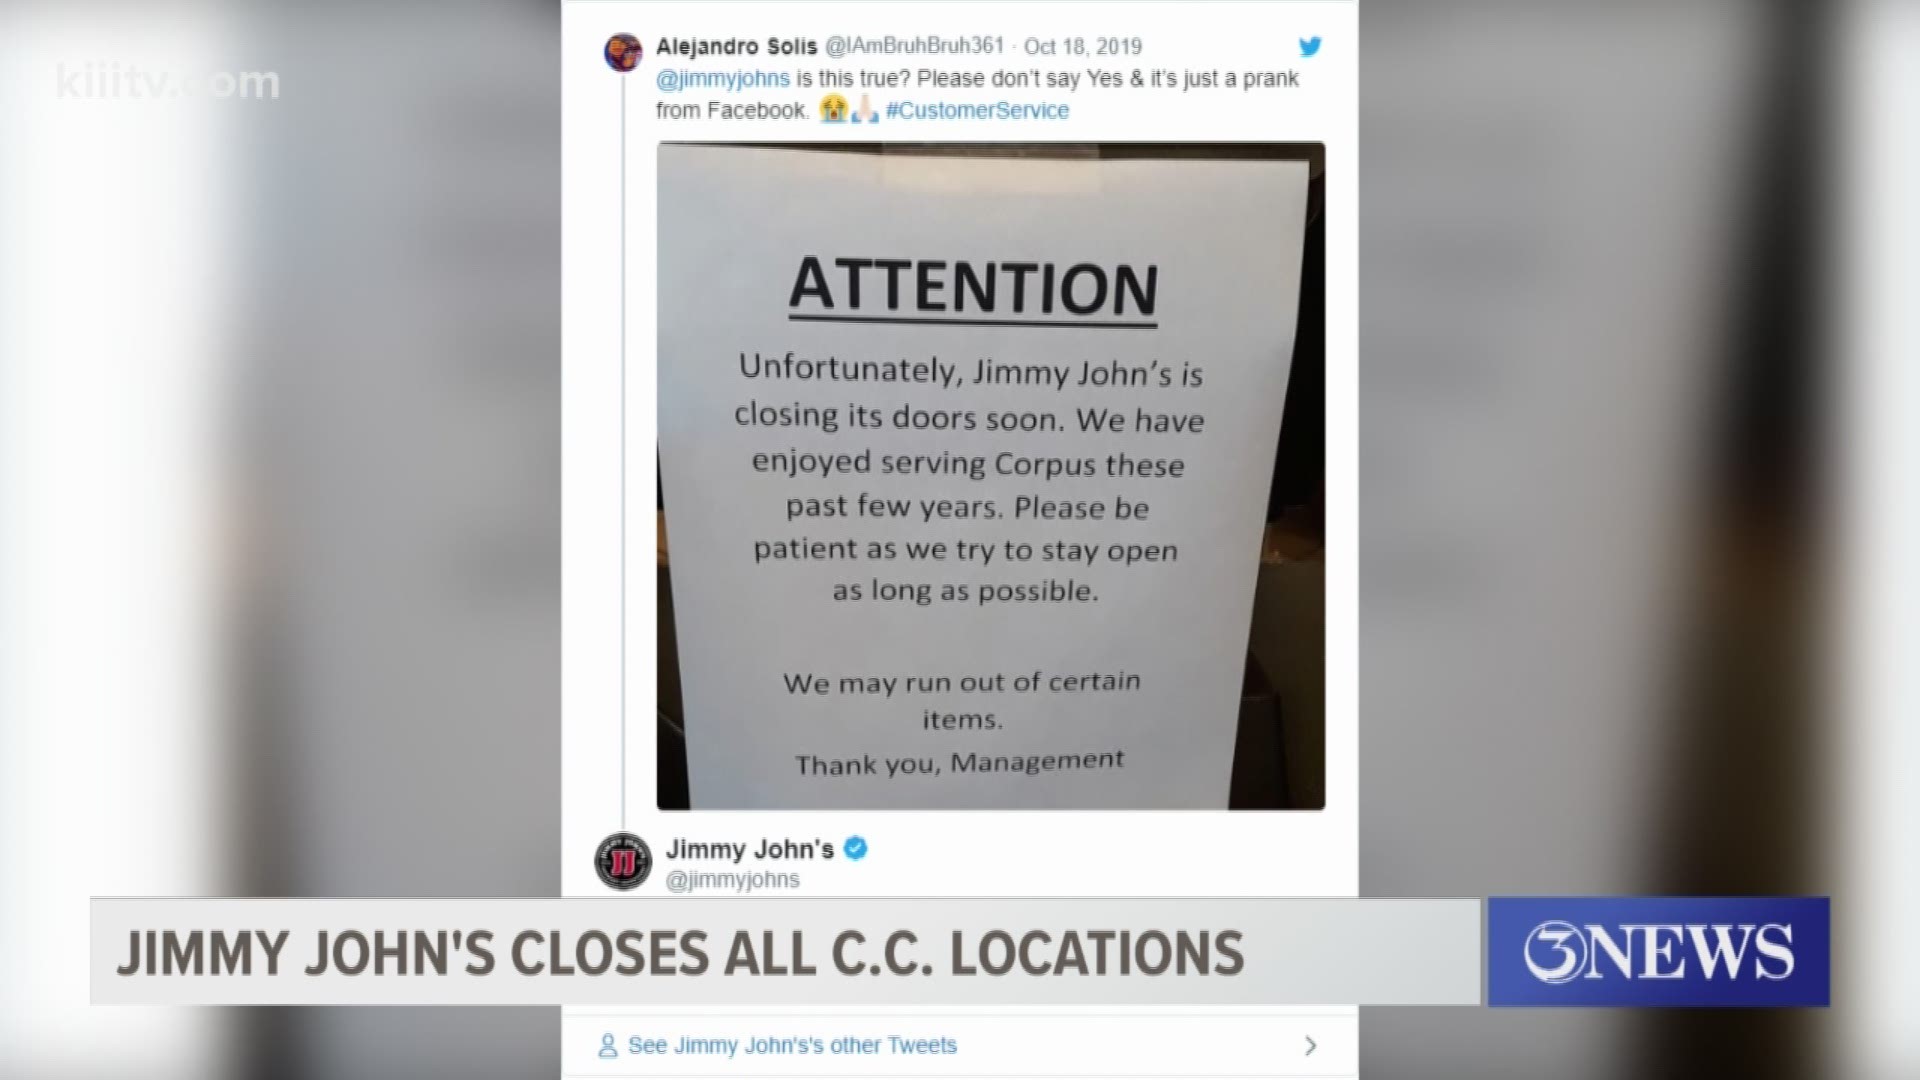 Jimmy John's has confirmed on social media that they have closed down all of their Corpus Christi locations.